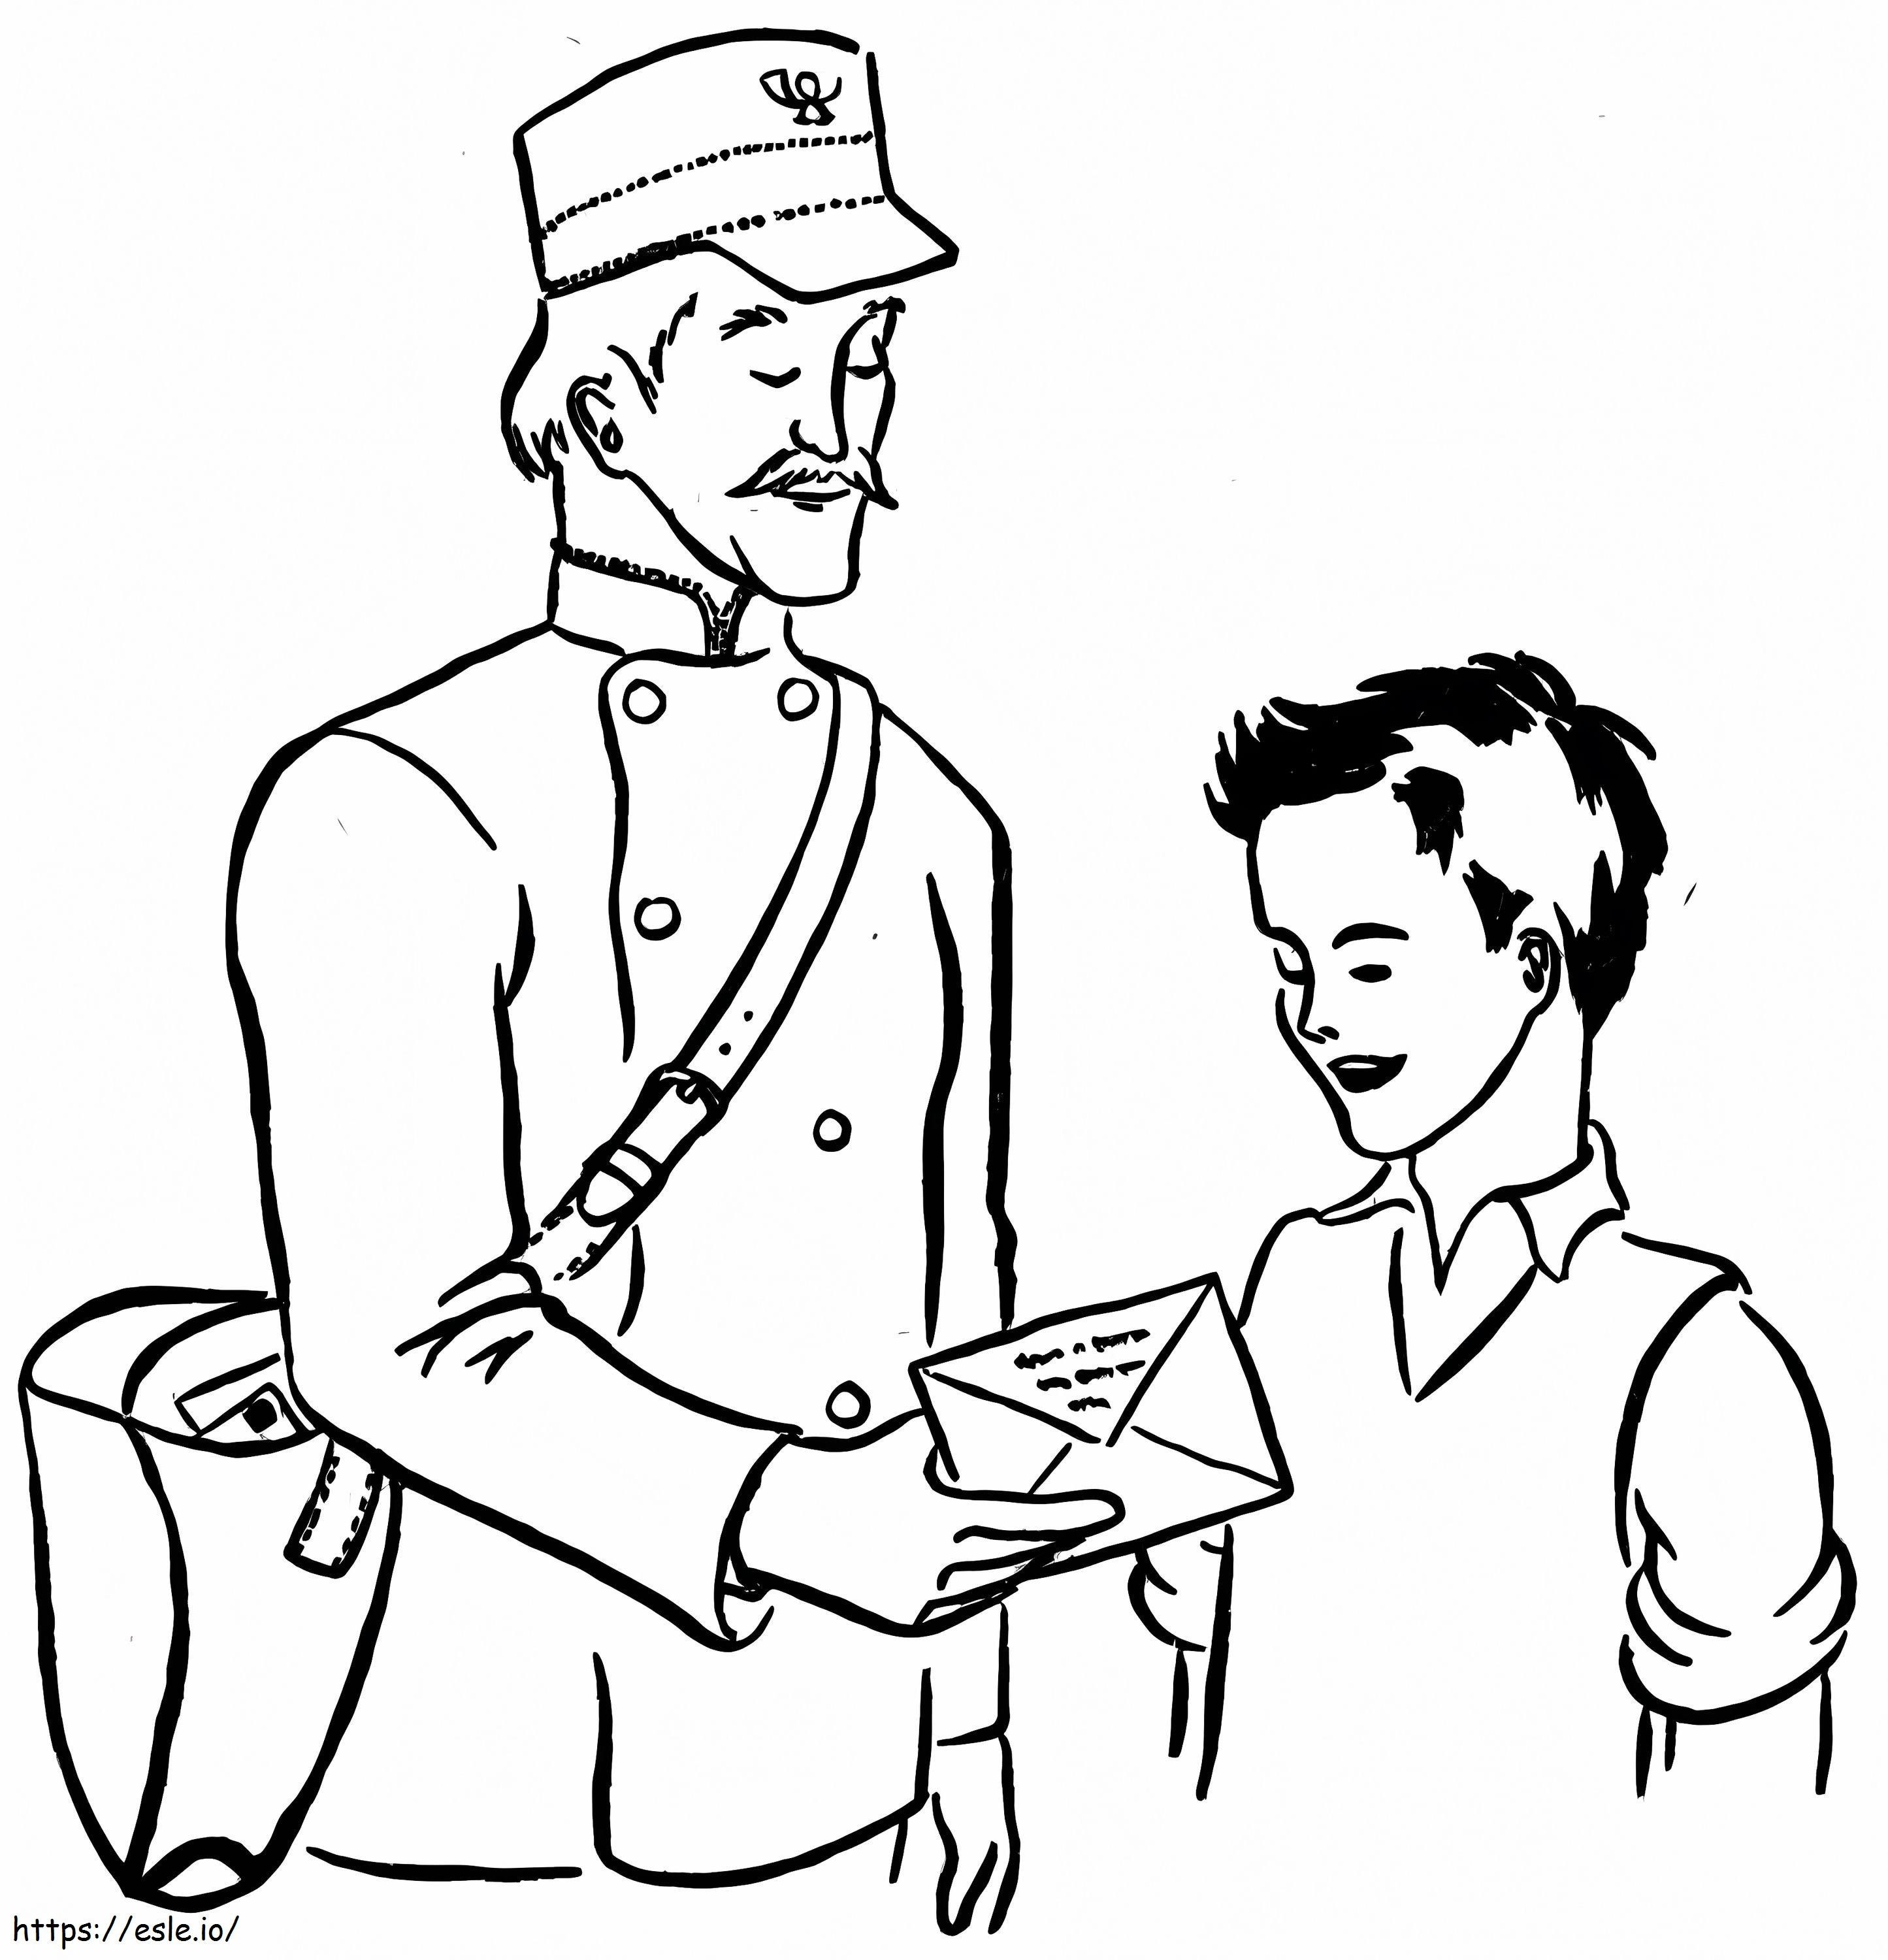 Postman And A Boy coloring page